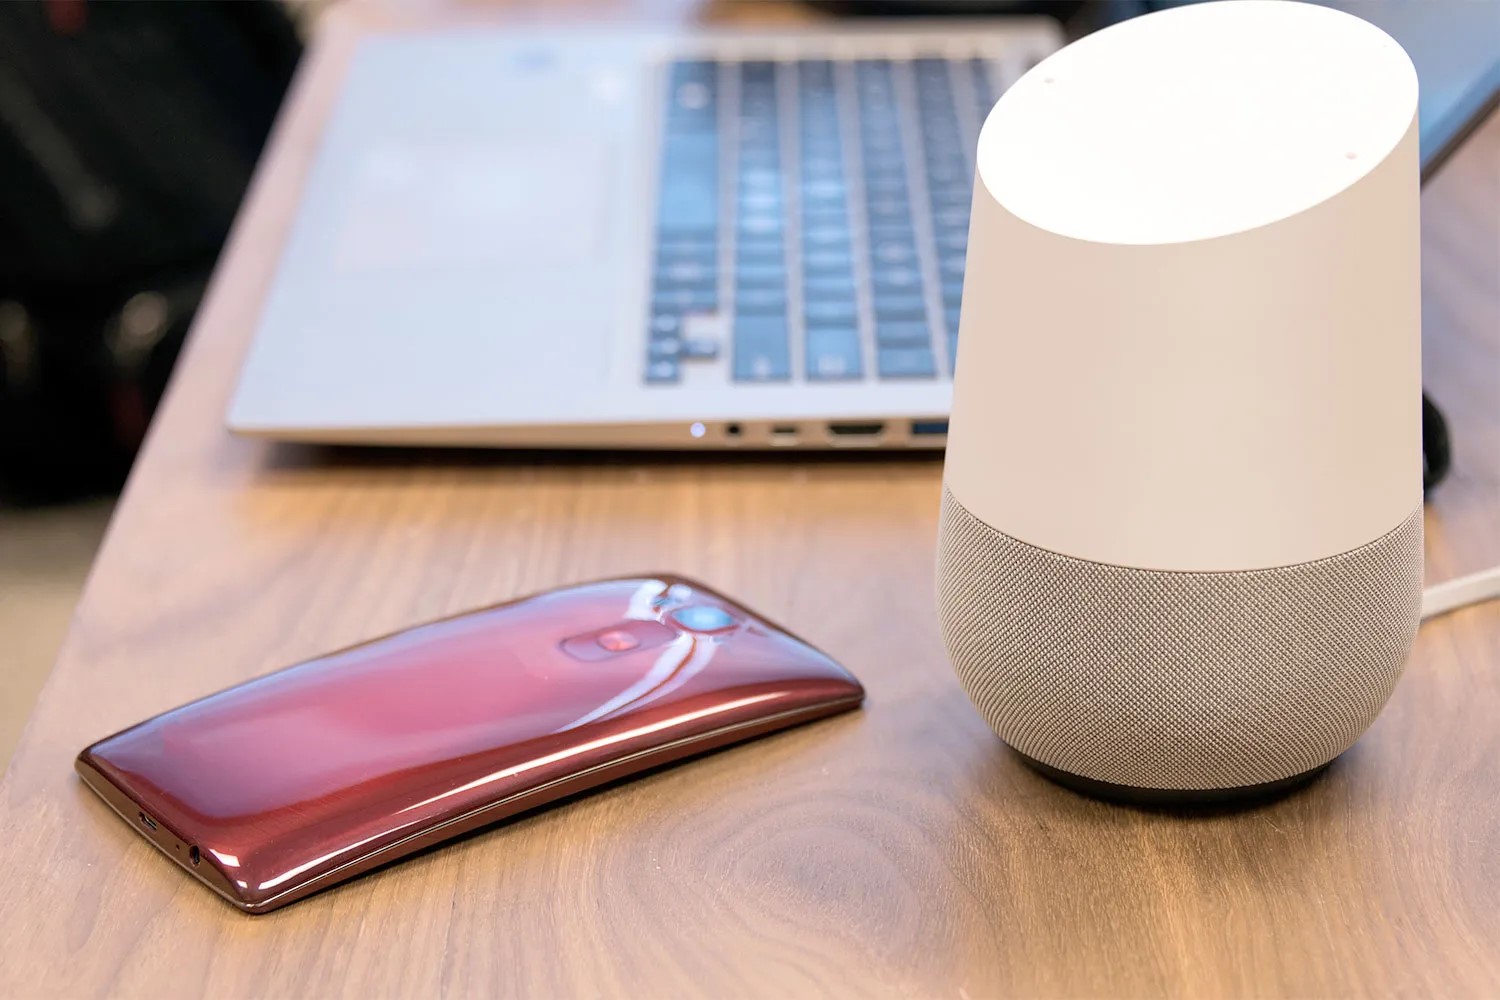 How To Connect Google Home To Computer